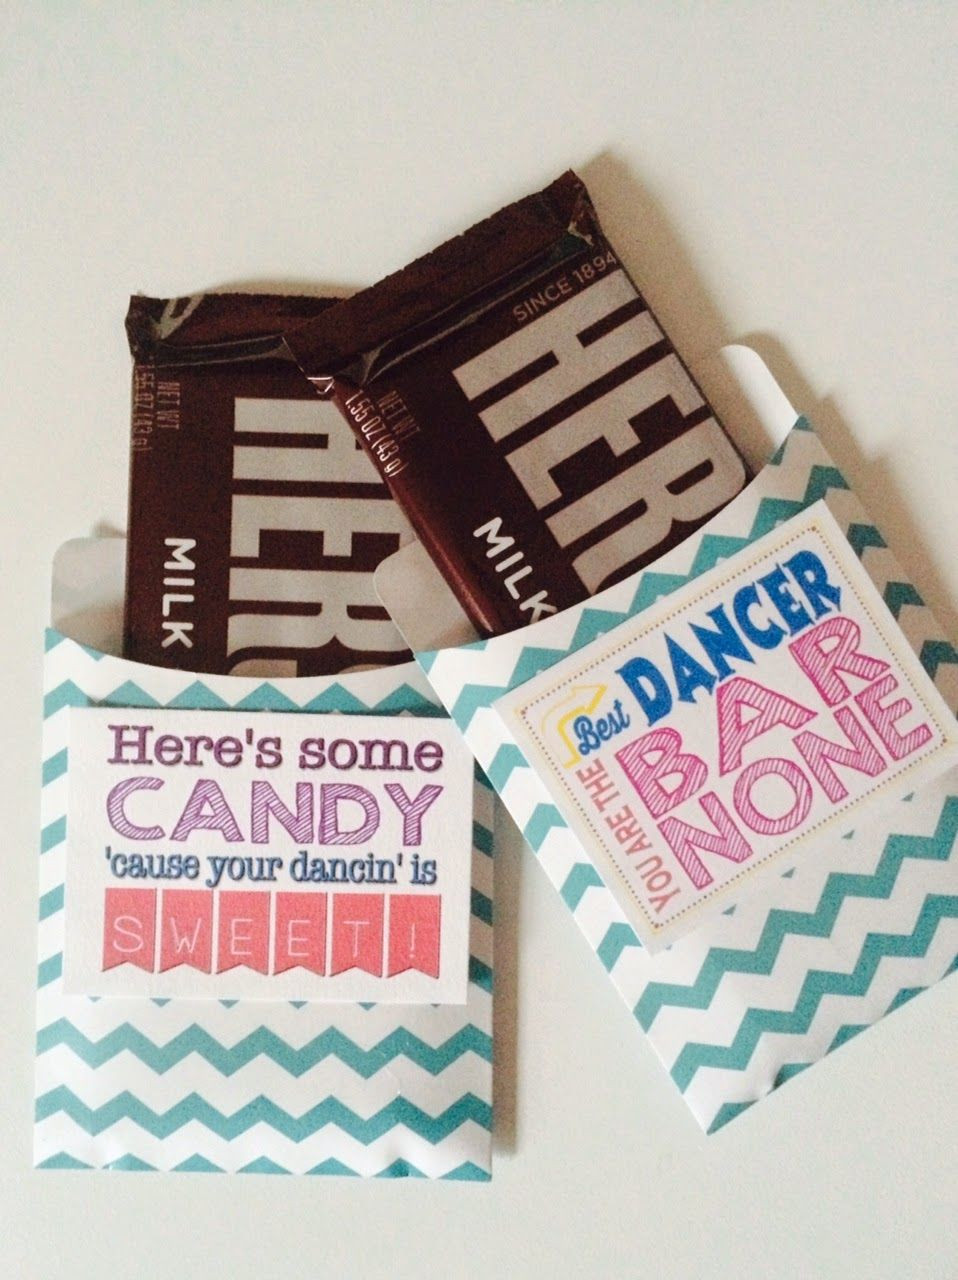 Dance Team Gift Ideas
 Dance Team Favors or Gifts Simple Candy Bar Wrapper